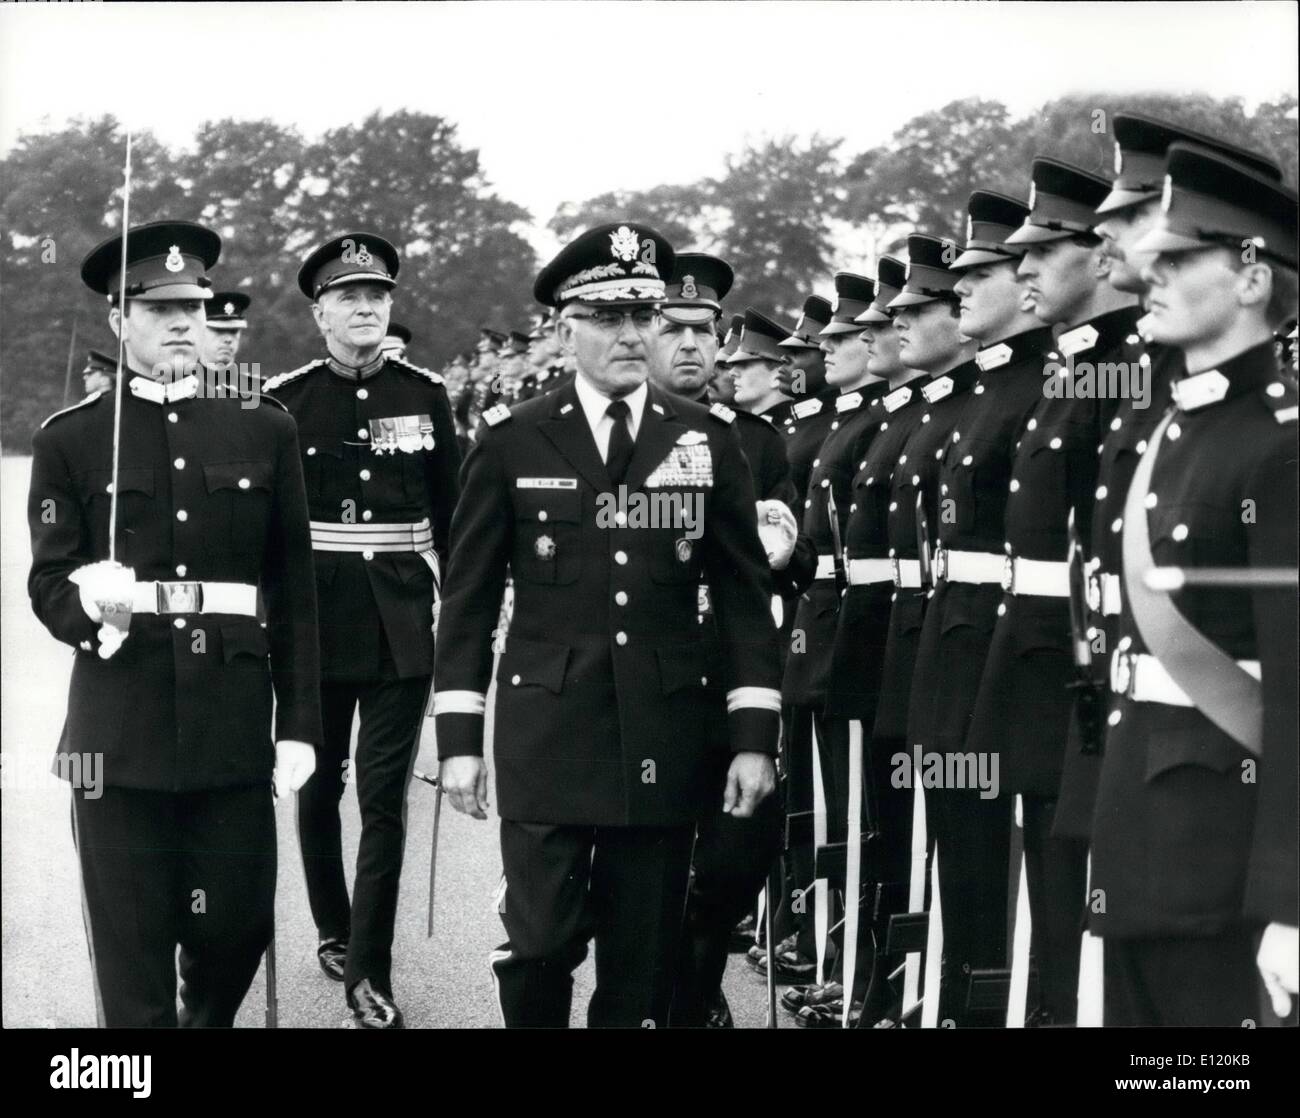 Aug. 08, 1981 - Top Sandhurst Cadet is a Gurkha: For the first time ever, a Gurkha soldier, Officer Cadet Bijay Kumar Rawat, 26, received the highly praised Sword of Honour at the Sandhurst passing out Sovereign Parade today. Reviewing the parade on behalf of The Queen, was General Bernard W.Rogers, Supreme Allied Commander Europe. Photo shows American General Bernard W. Rogers, Supreme Allied Commander Europe, seen reviewing the parade on behalf of The Queen at Sandhurst today. Stock Photo